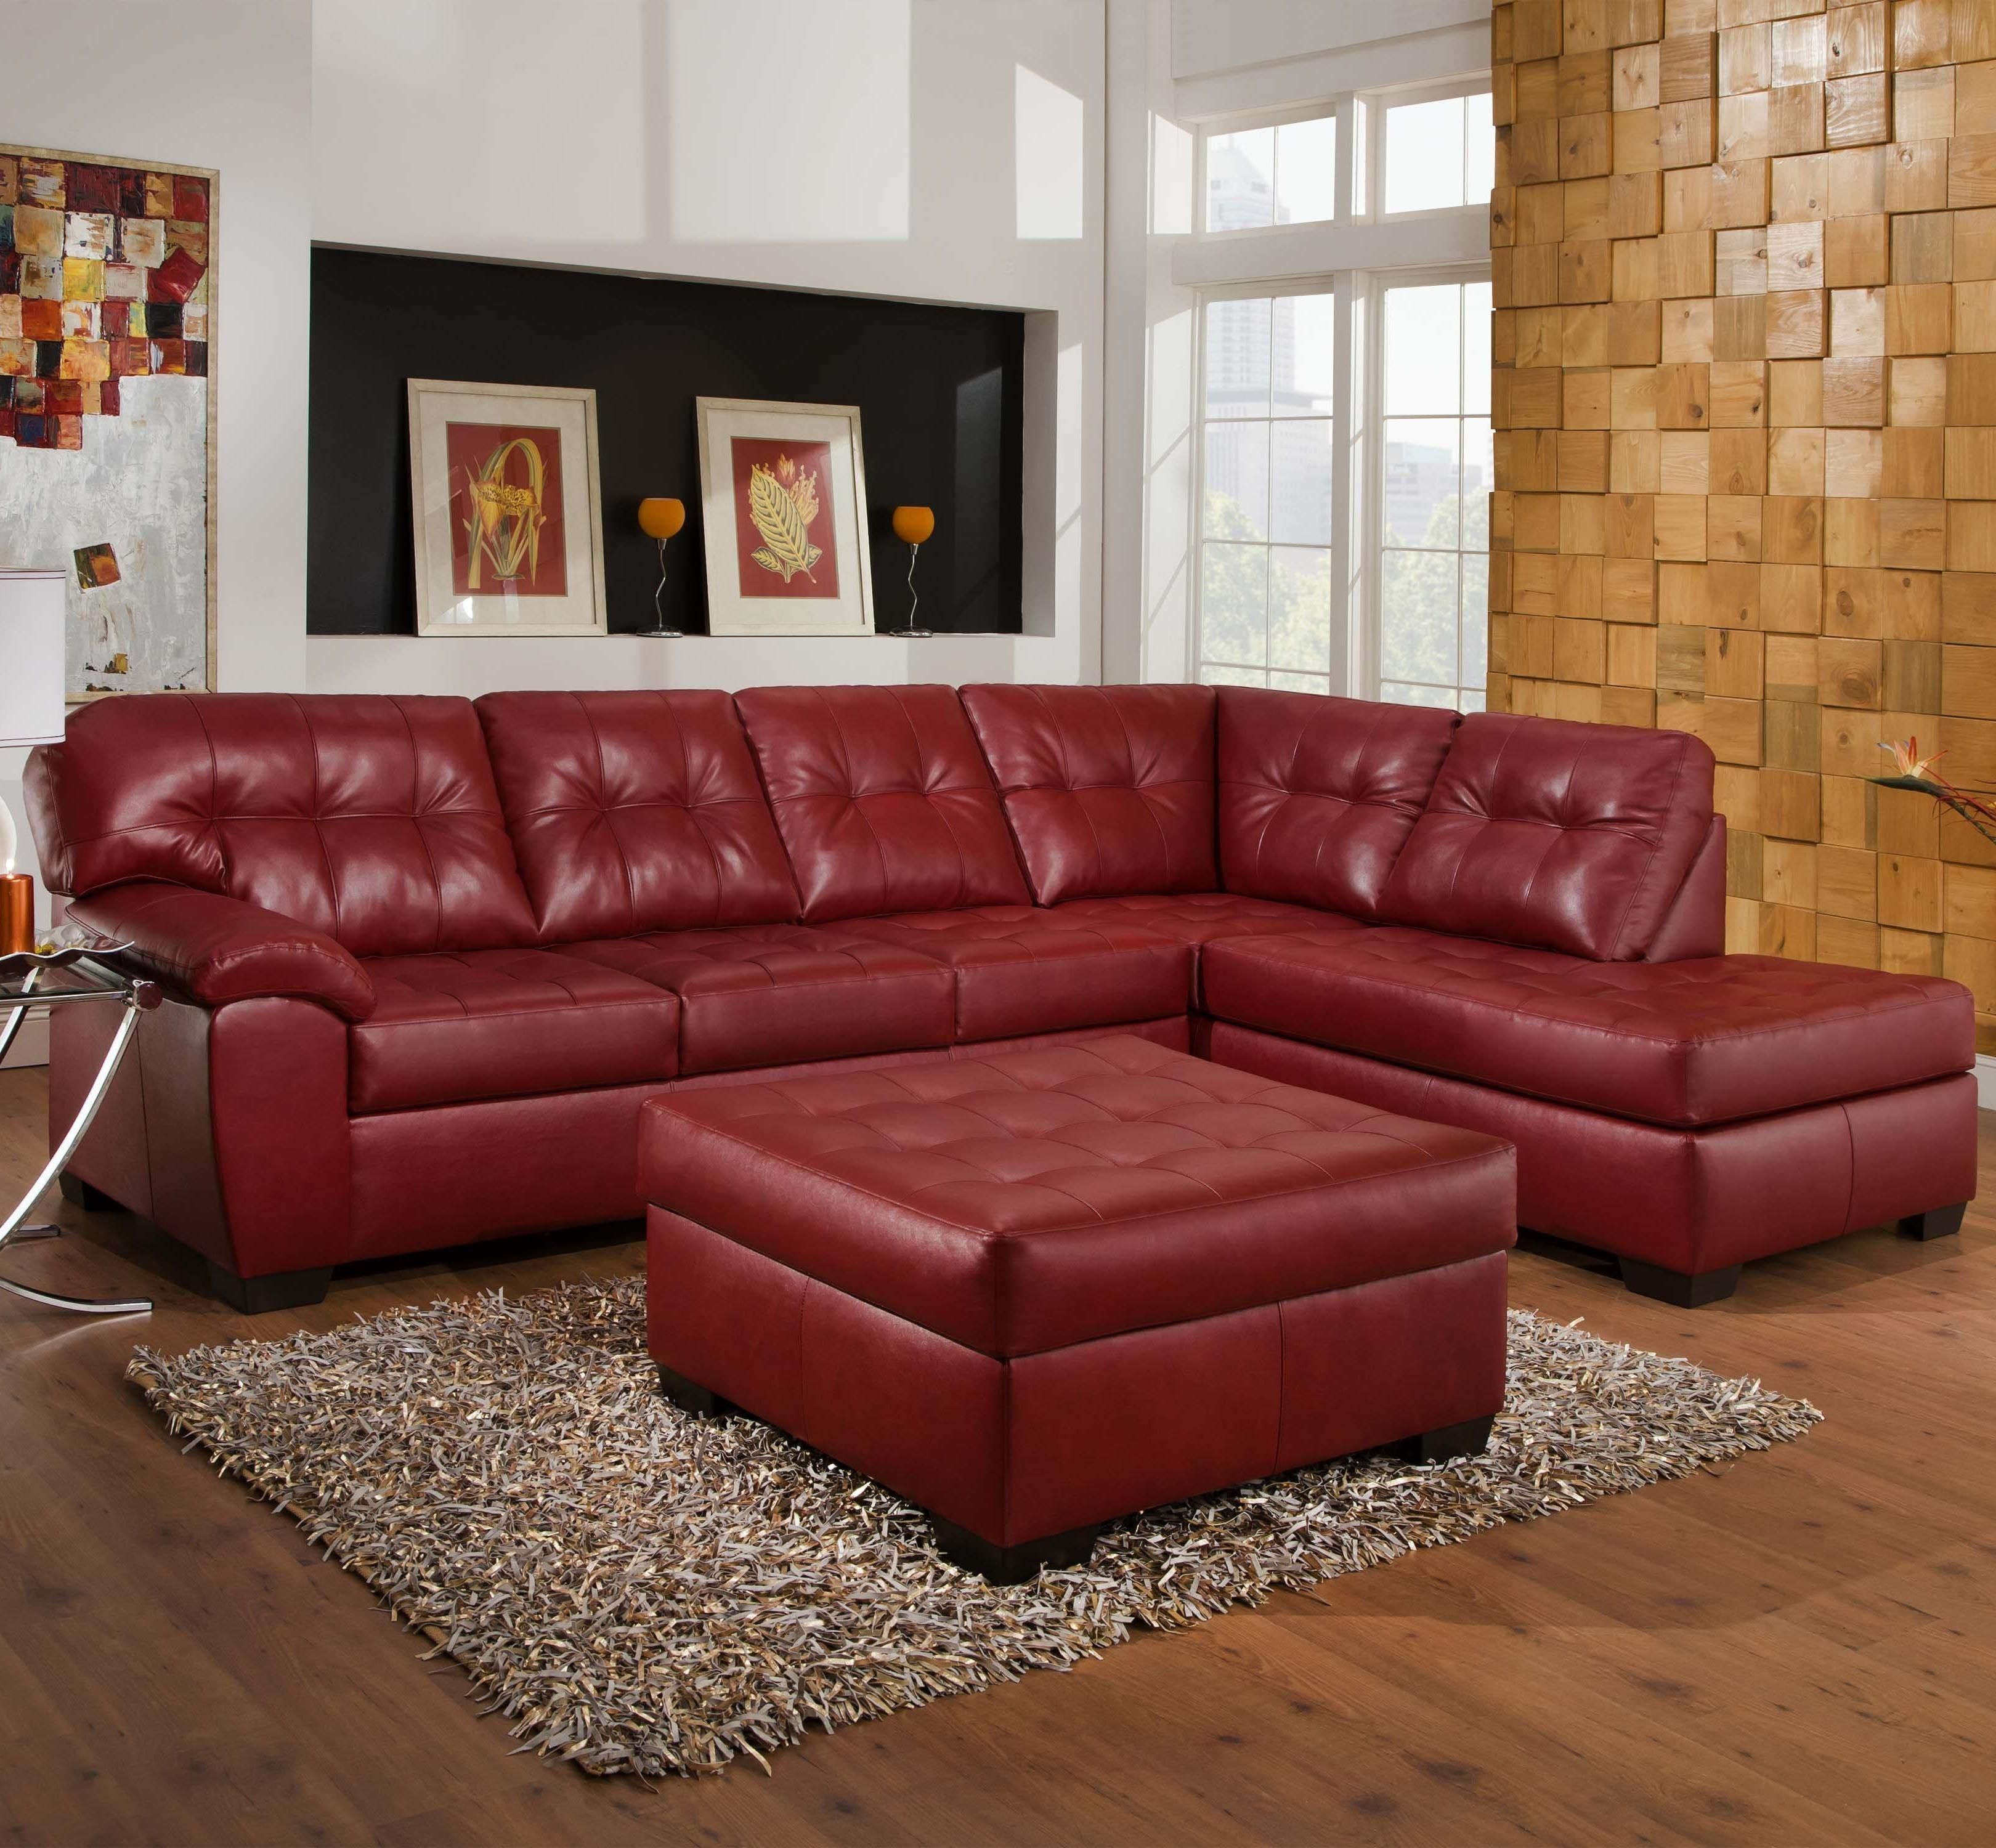 9569 2 Piece Sectional With Tufted Seats & Backsimmons Within Simmons Chaise Sofas (Photo 3 of 10)